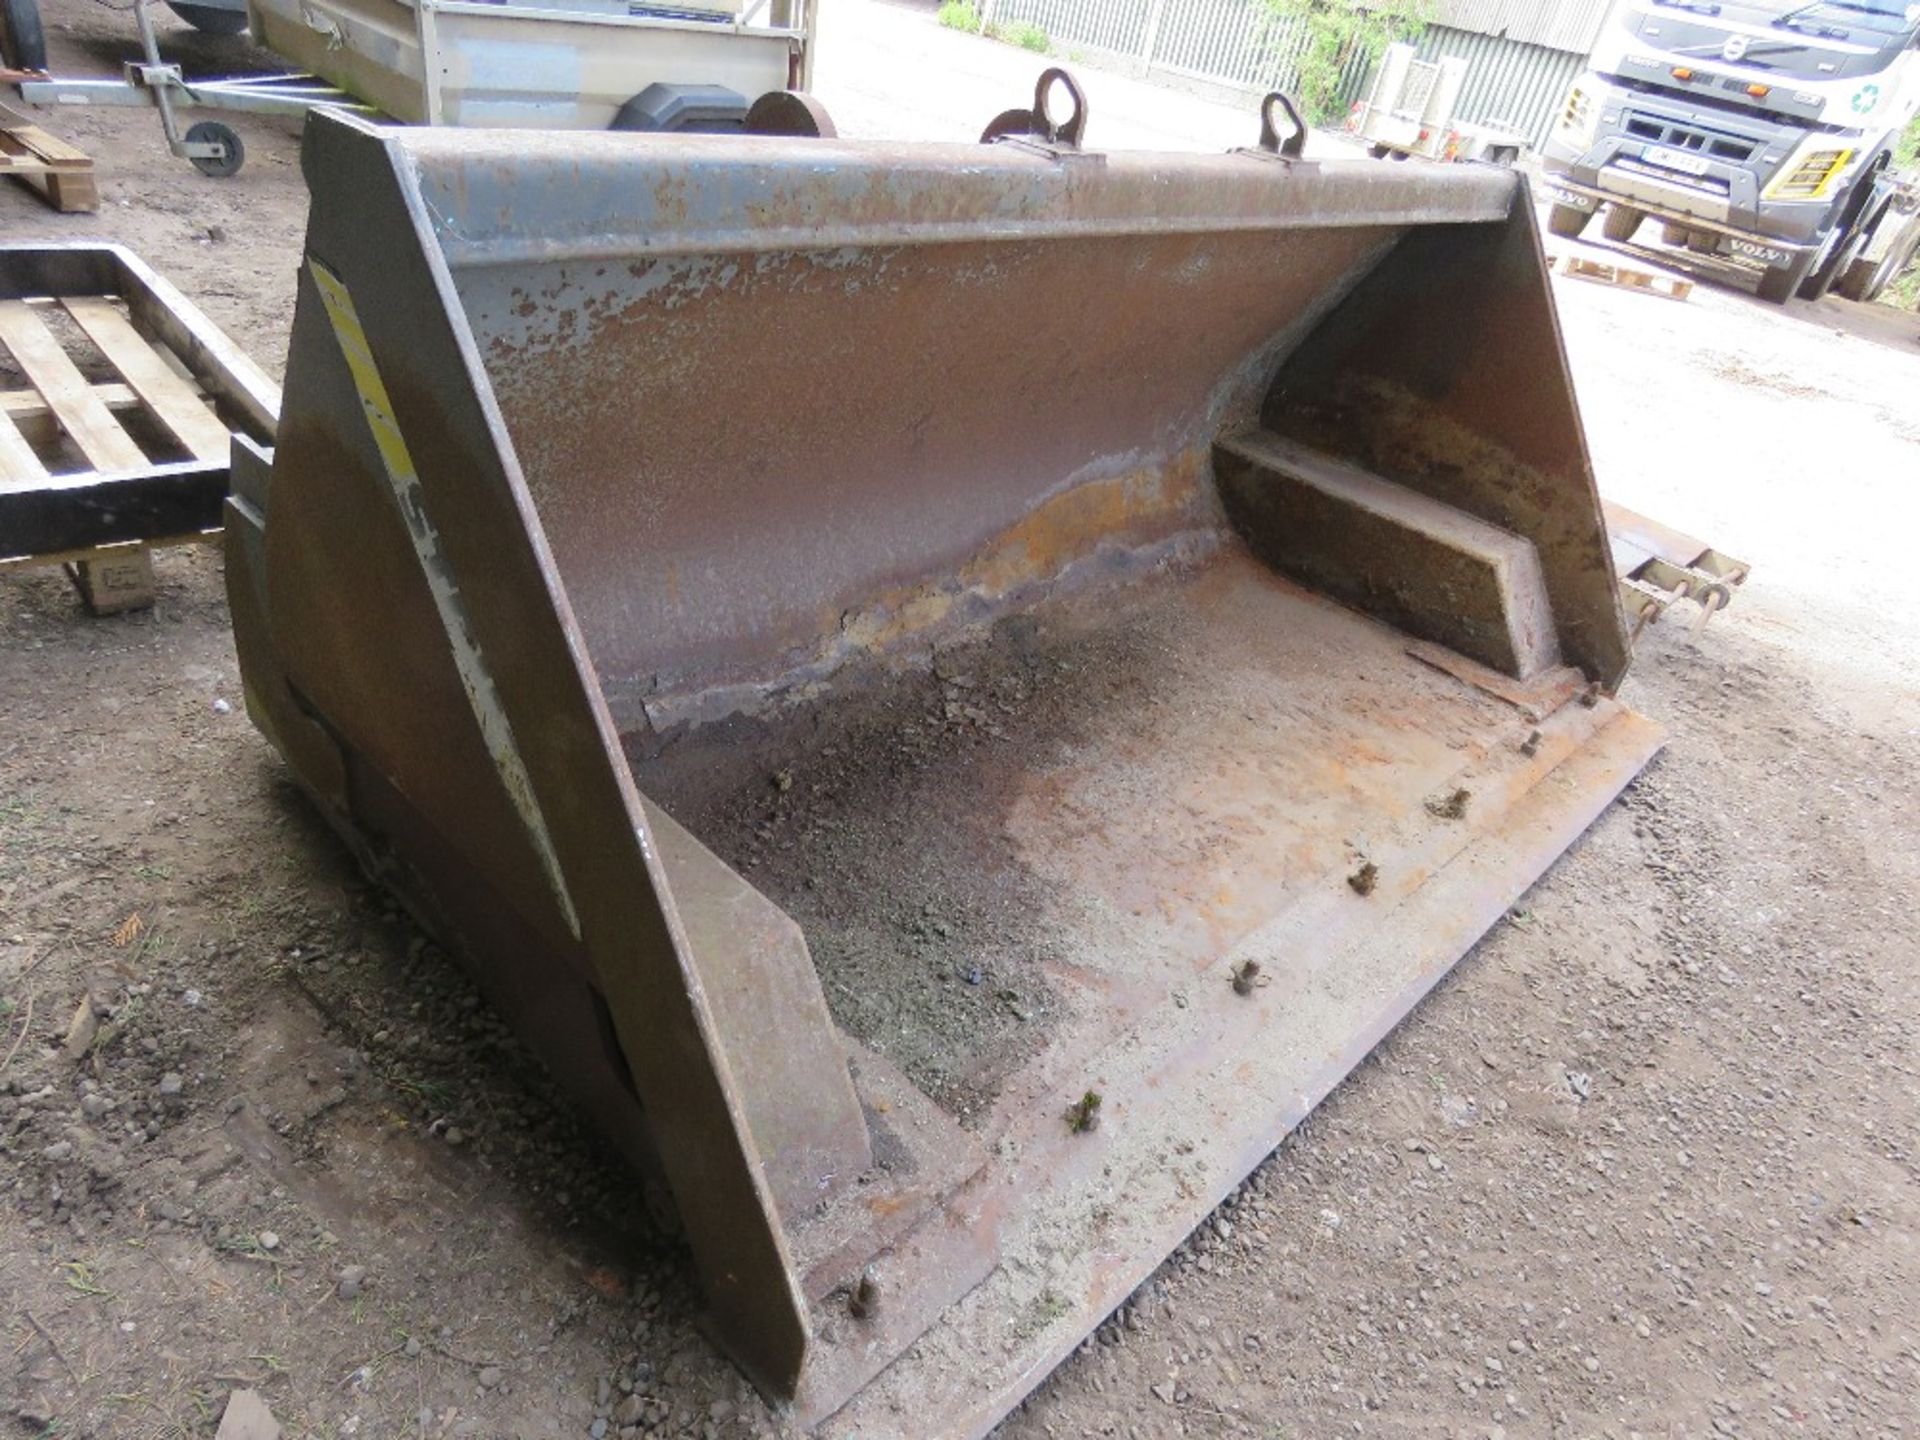 STRIMECH TOE TIP BUCKET, 2.4M WIDTHA PPROX, HEAVY DUTY BRACKETS FITTED. APPEARS LITTLE USED.....THIS - Image 2 of 7